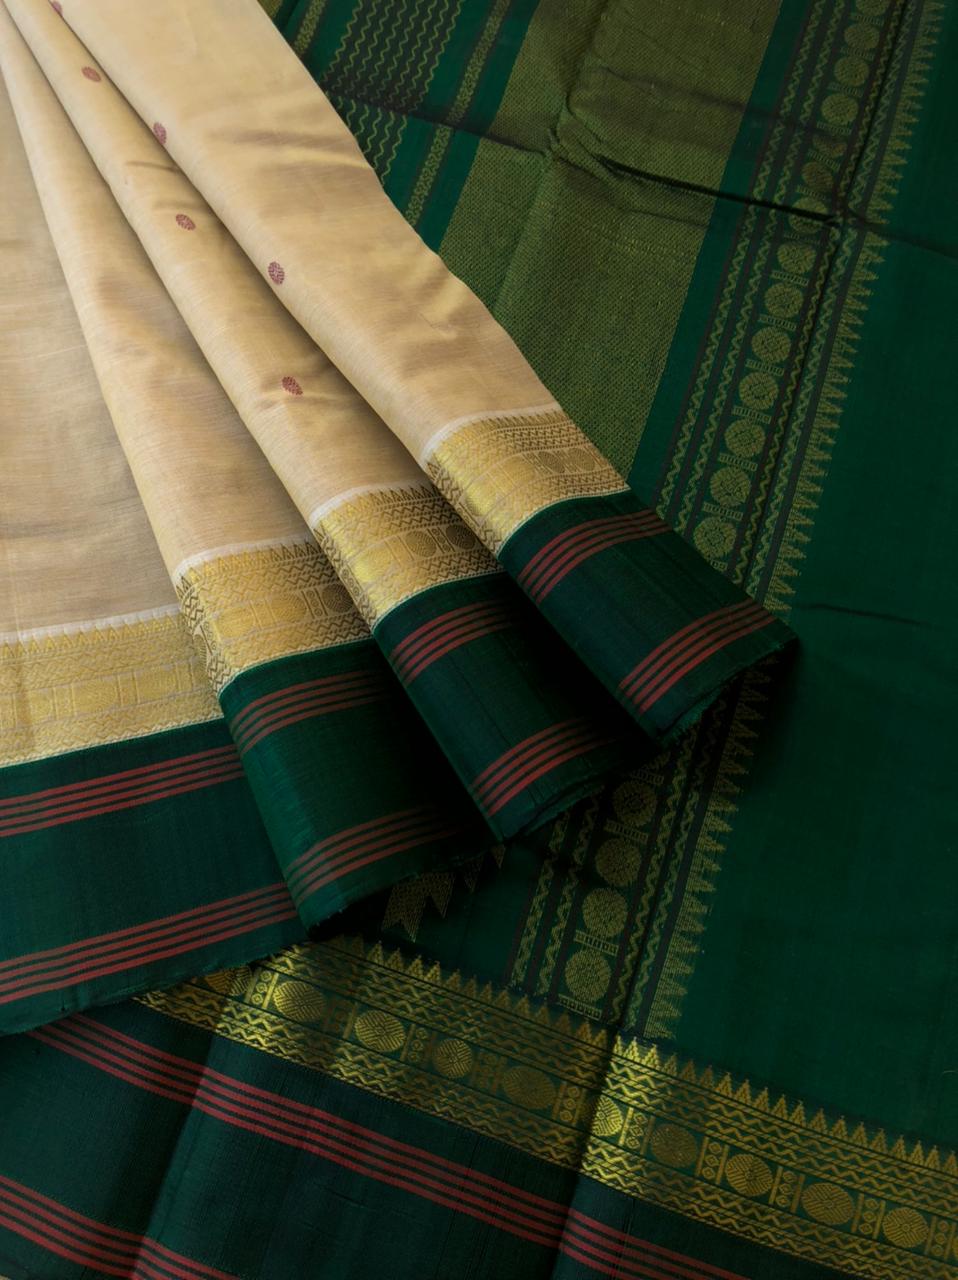 Divyam - Korvai Silk Cotton with Pure Silk Woven Borders - deep beige and Meenakshi green